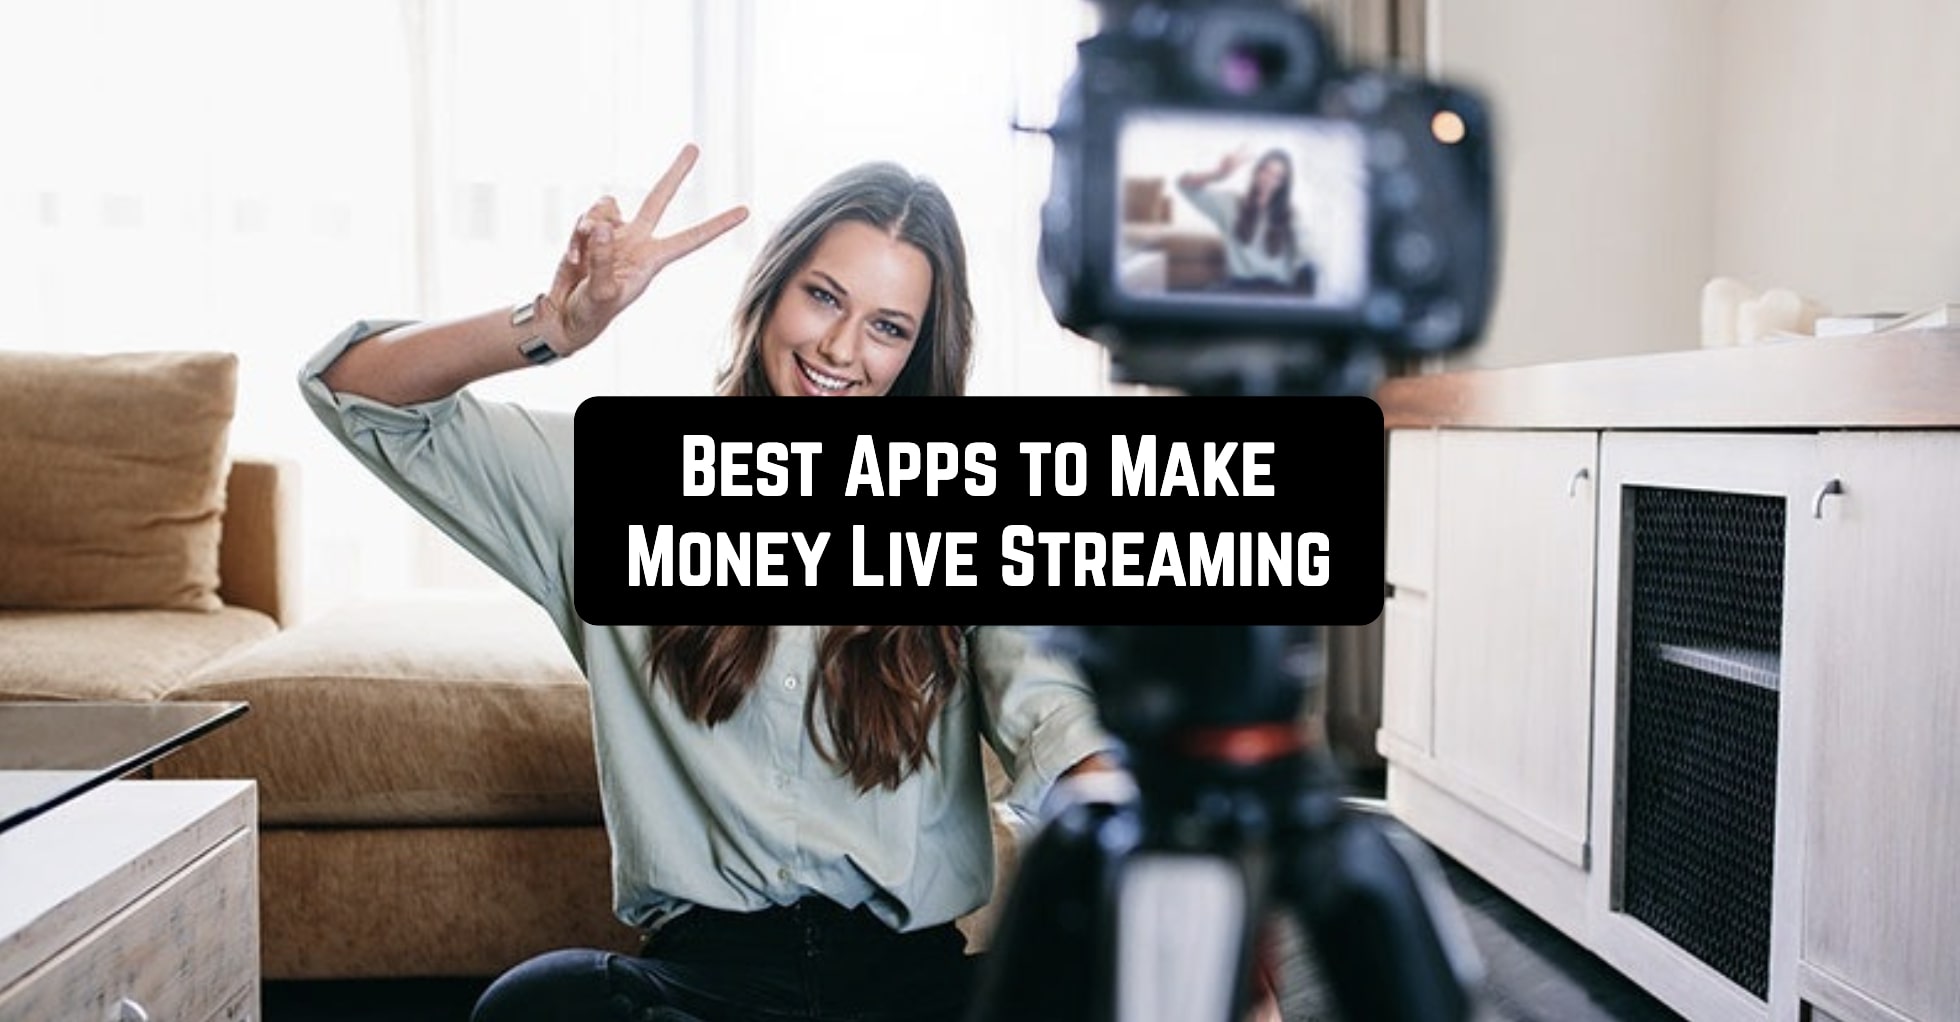 Best Apps to Make Money Live Streaming